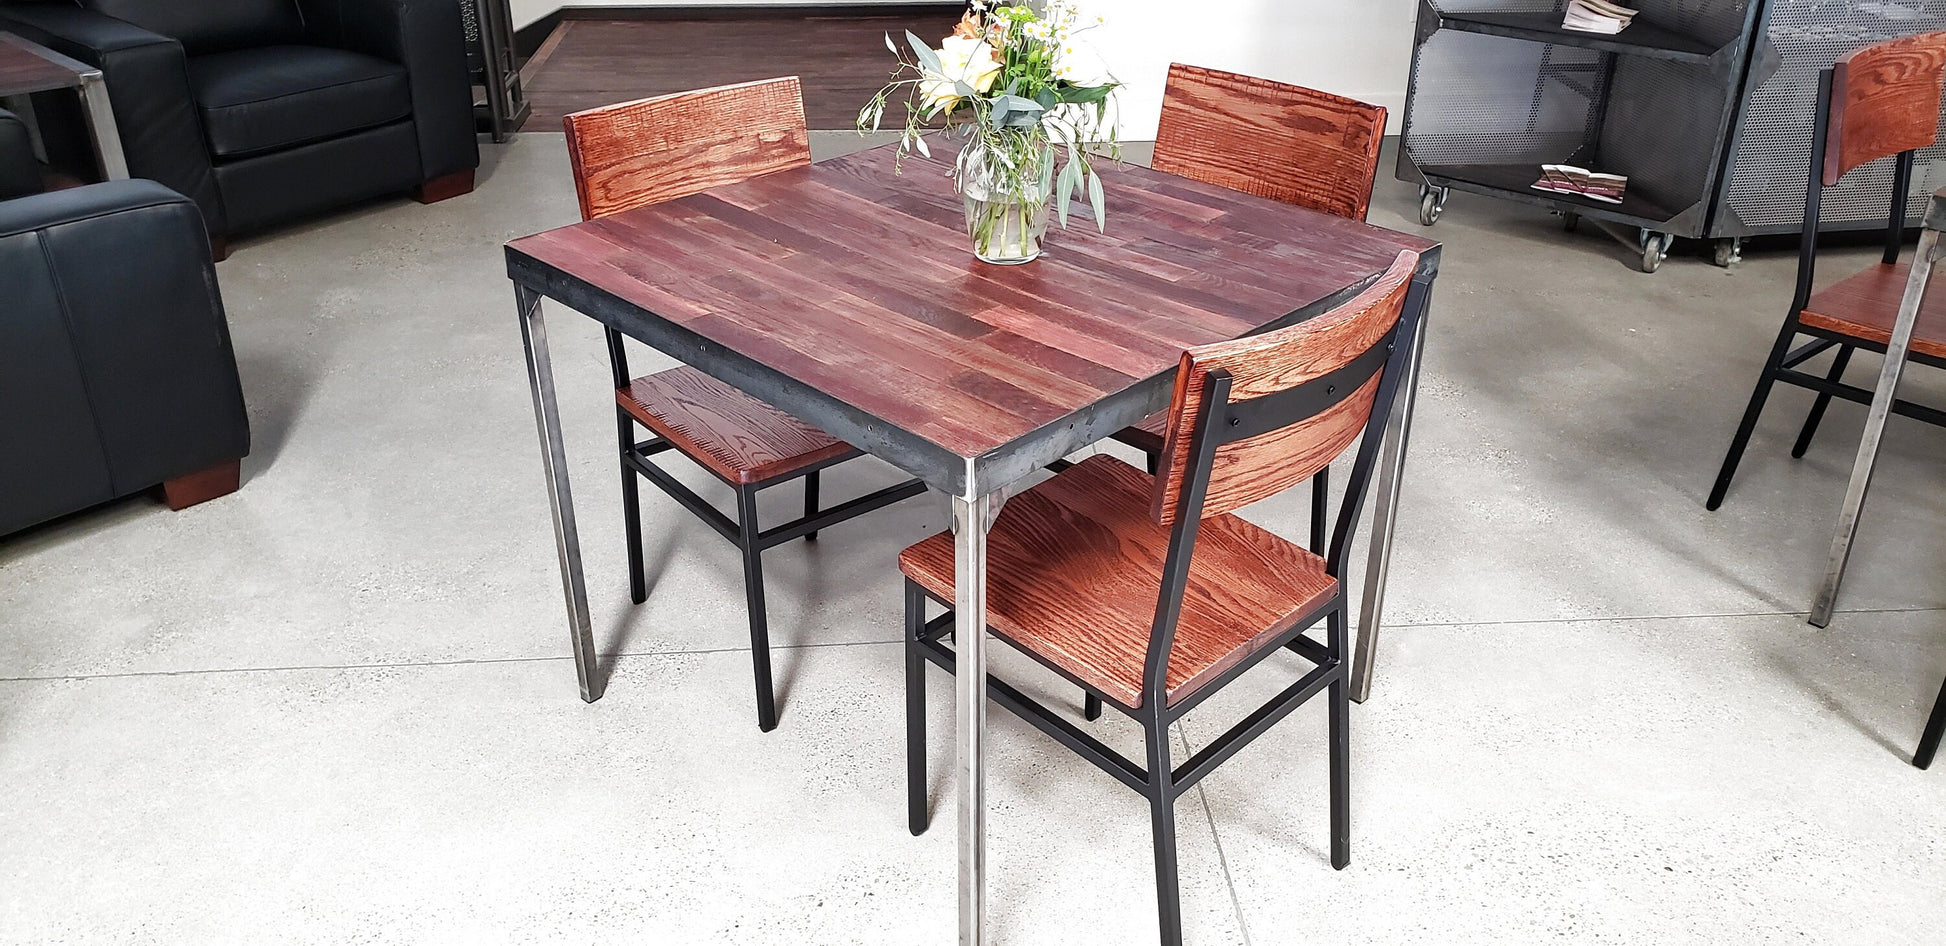 Wine Barrel Table and Chairs - Kikar - Made from retired Napa wine barrel staves 100% Recycled!